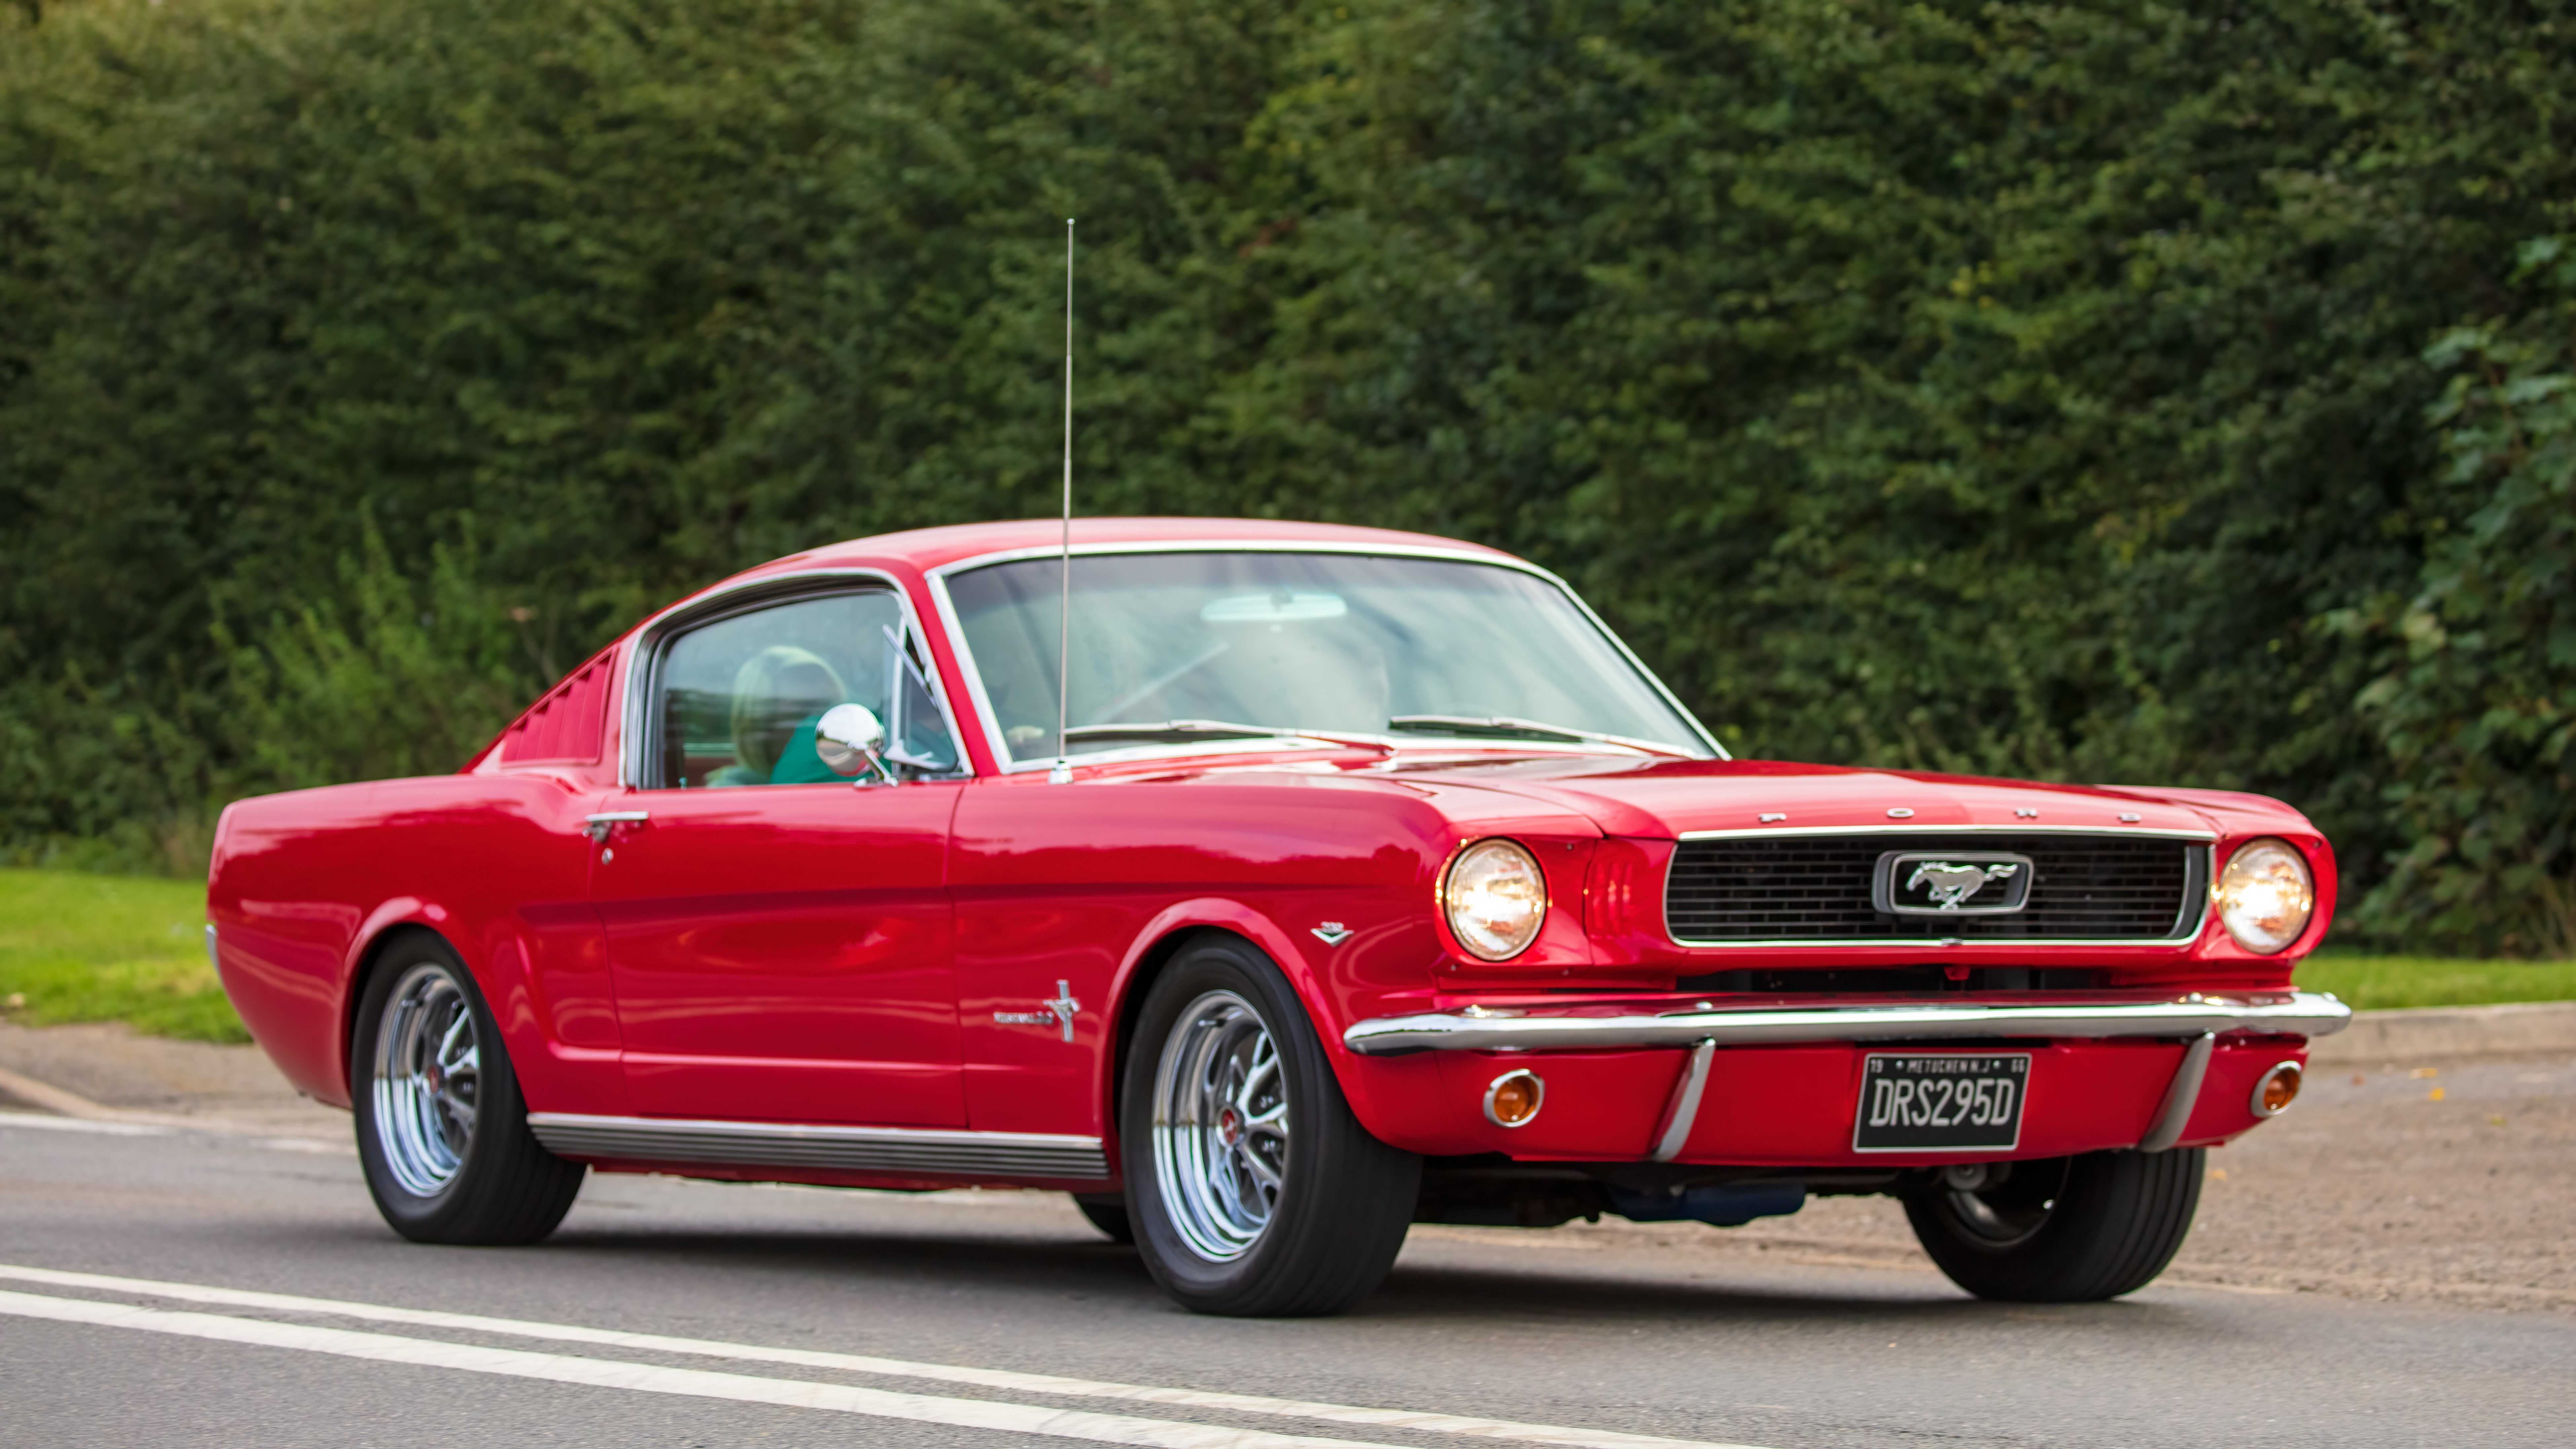 The Mustang, albeit an earlier model, is also sworn by as a fantastic affordable find